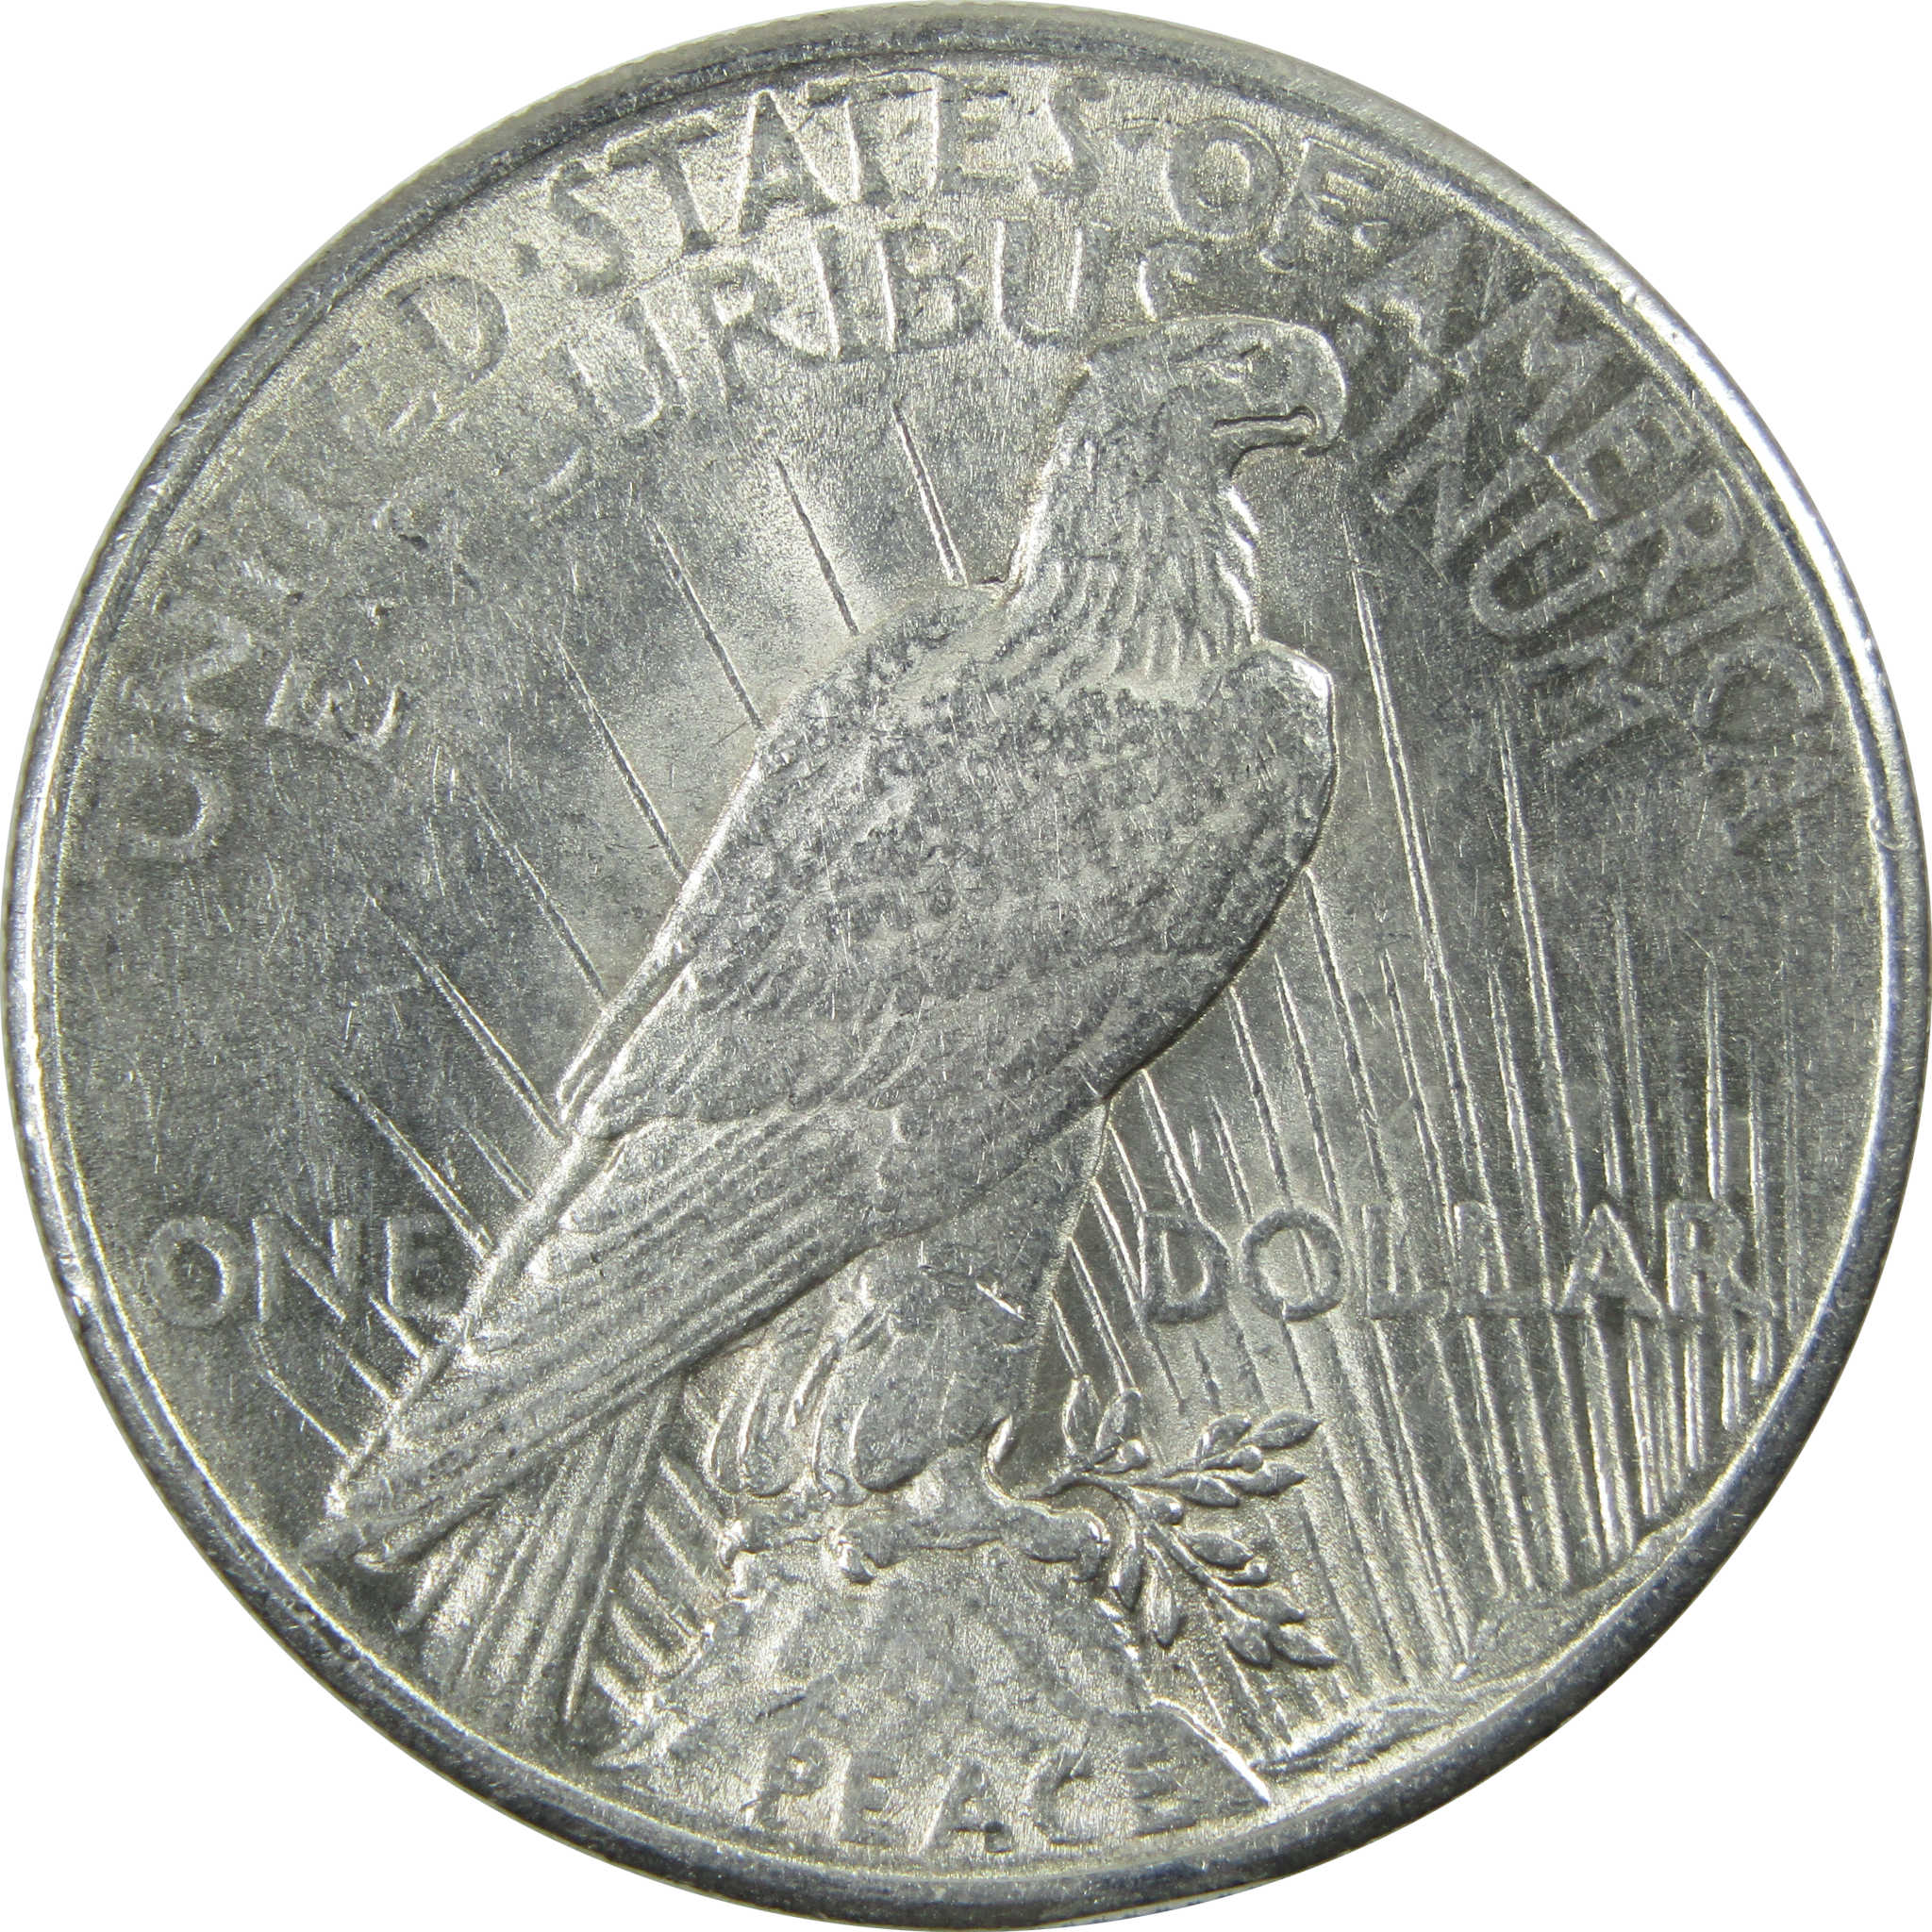 1925 Peace Dollar XF EF Extremely Fine Silver $1 Coin SKU:I13808